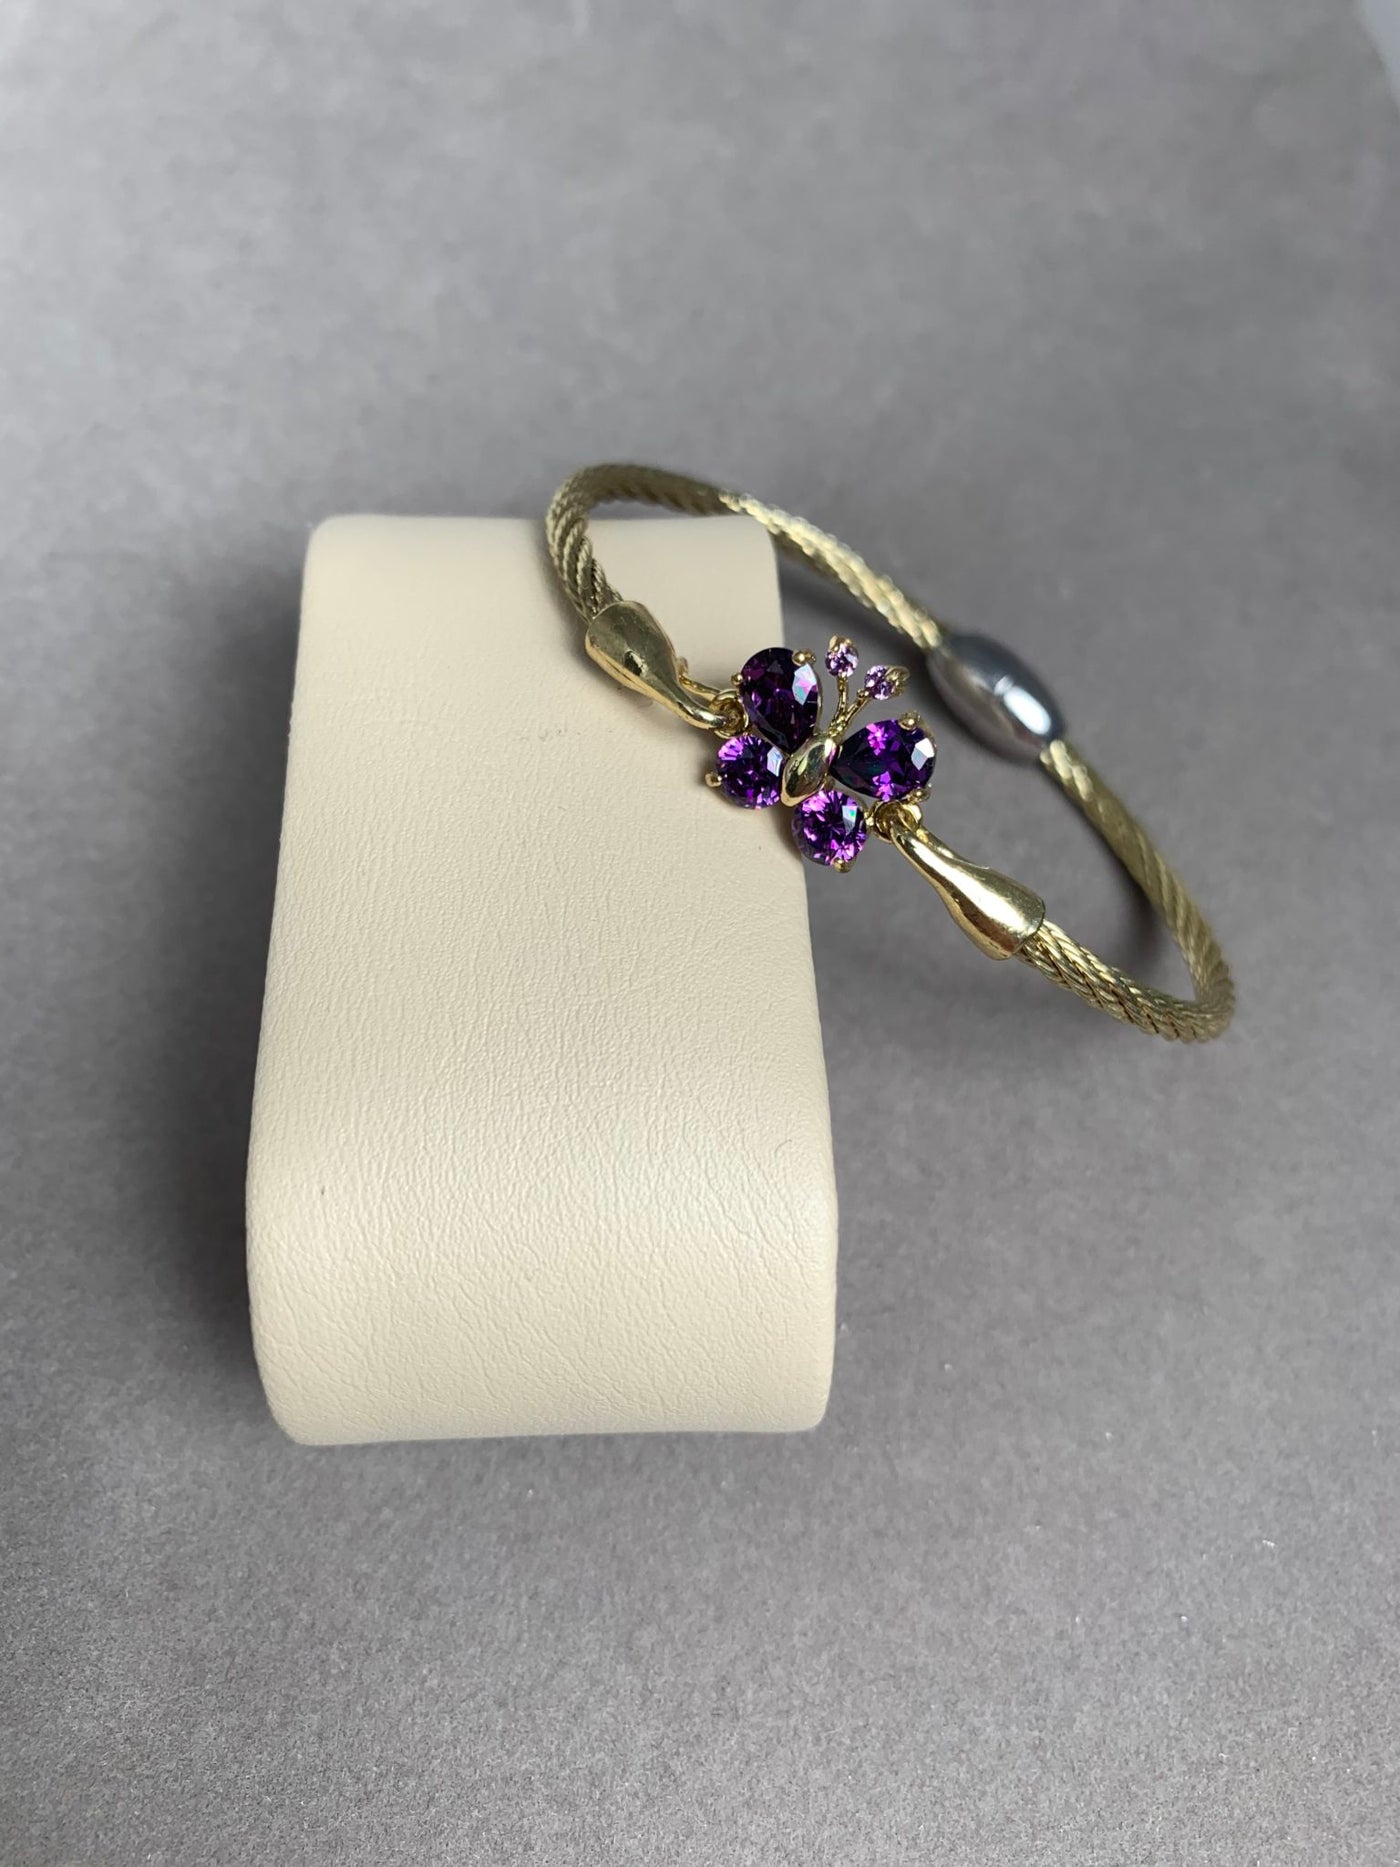 Gold Tone Wire Bangle Bracelet featuring Purple Crystal Butterfly